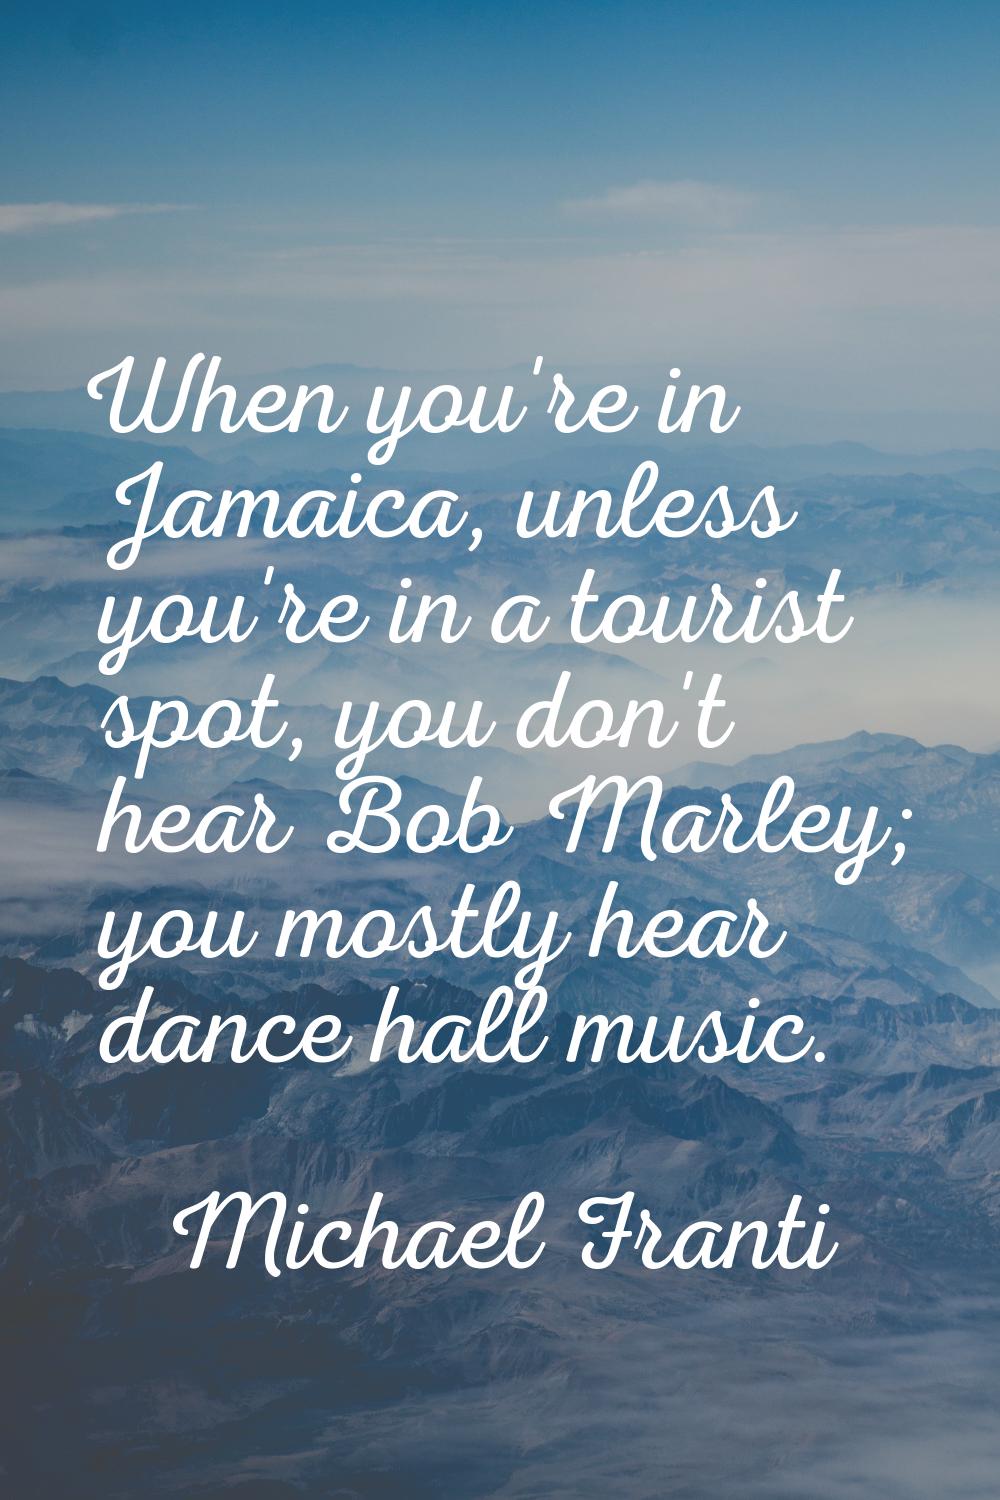 When you're in Jamaica, unless you're in a tourist spot, you don't hear Bob Marley; you mostly hear